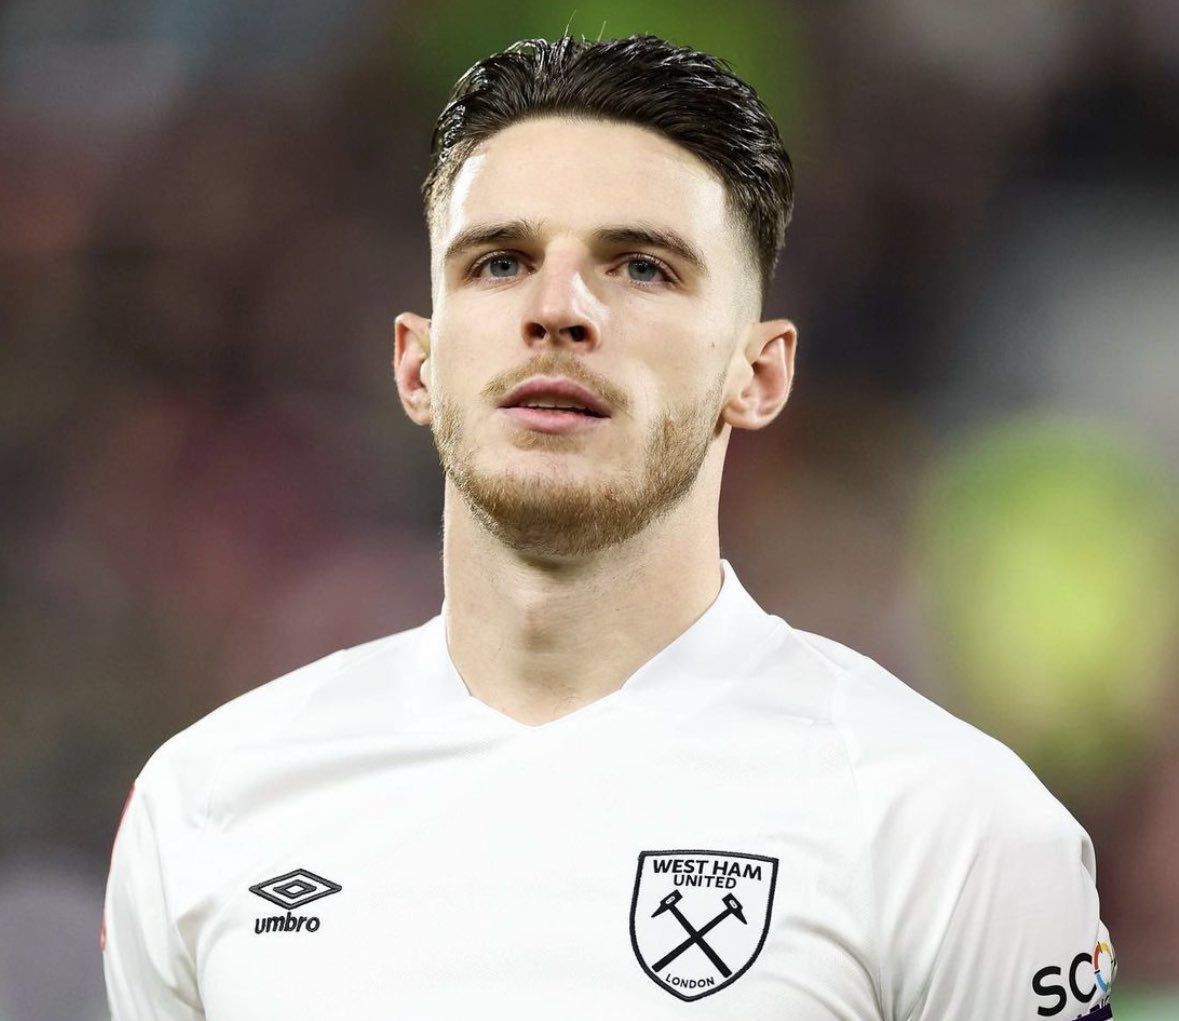 West Ham rejected Manchester City’s proposal for Declan Rice as they know Arsenal will also bid again for more than £90m total package. Plan has been clear for days. 🚨⚪️🏴󠁧󠁢󠁥󠁮󠁧󠁿

More to follow as Arsenal third bid is expected soon but Manchester City remain in the race.